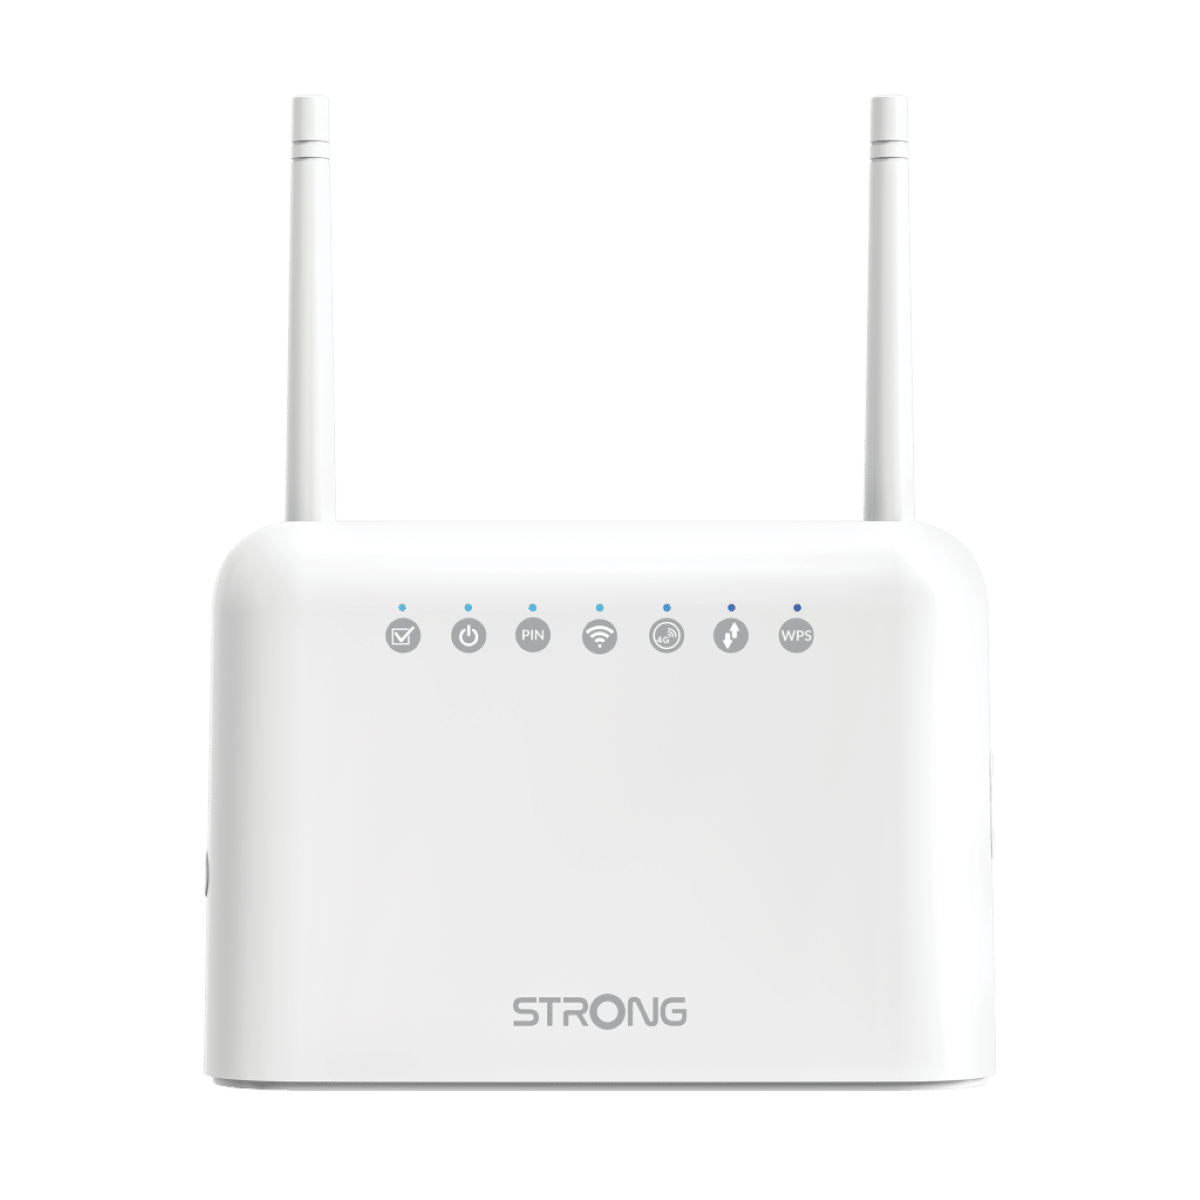 STRONG Router 350 4G Router LTE WLAN